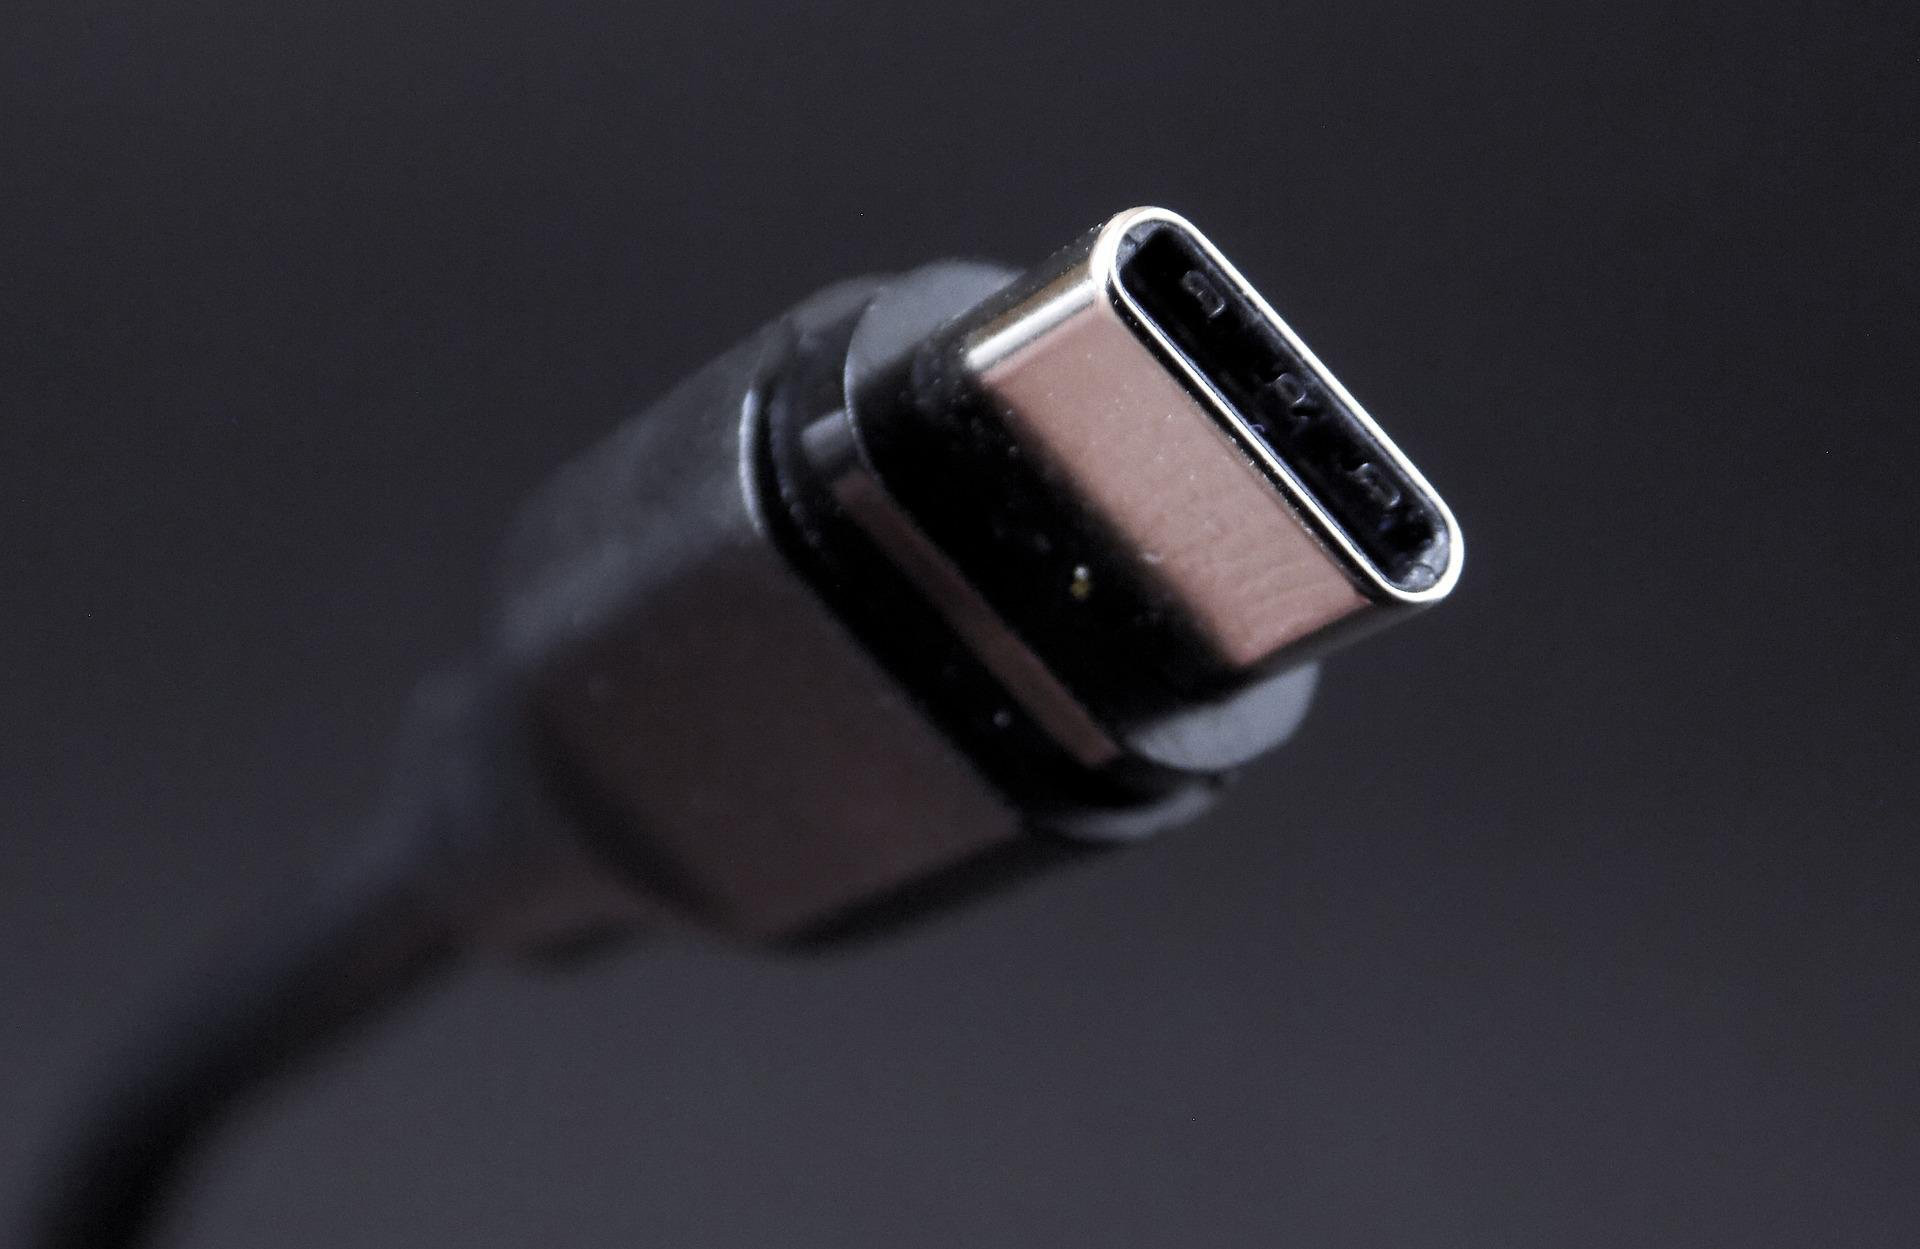 In 2024 all electronic devices sold in Europe must have an USB-C port